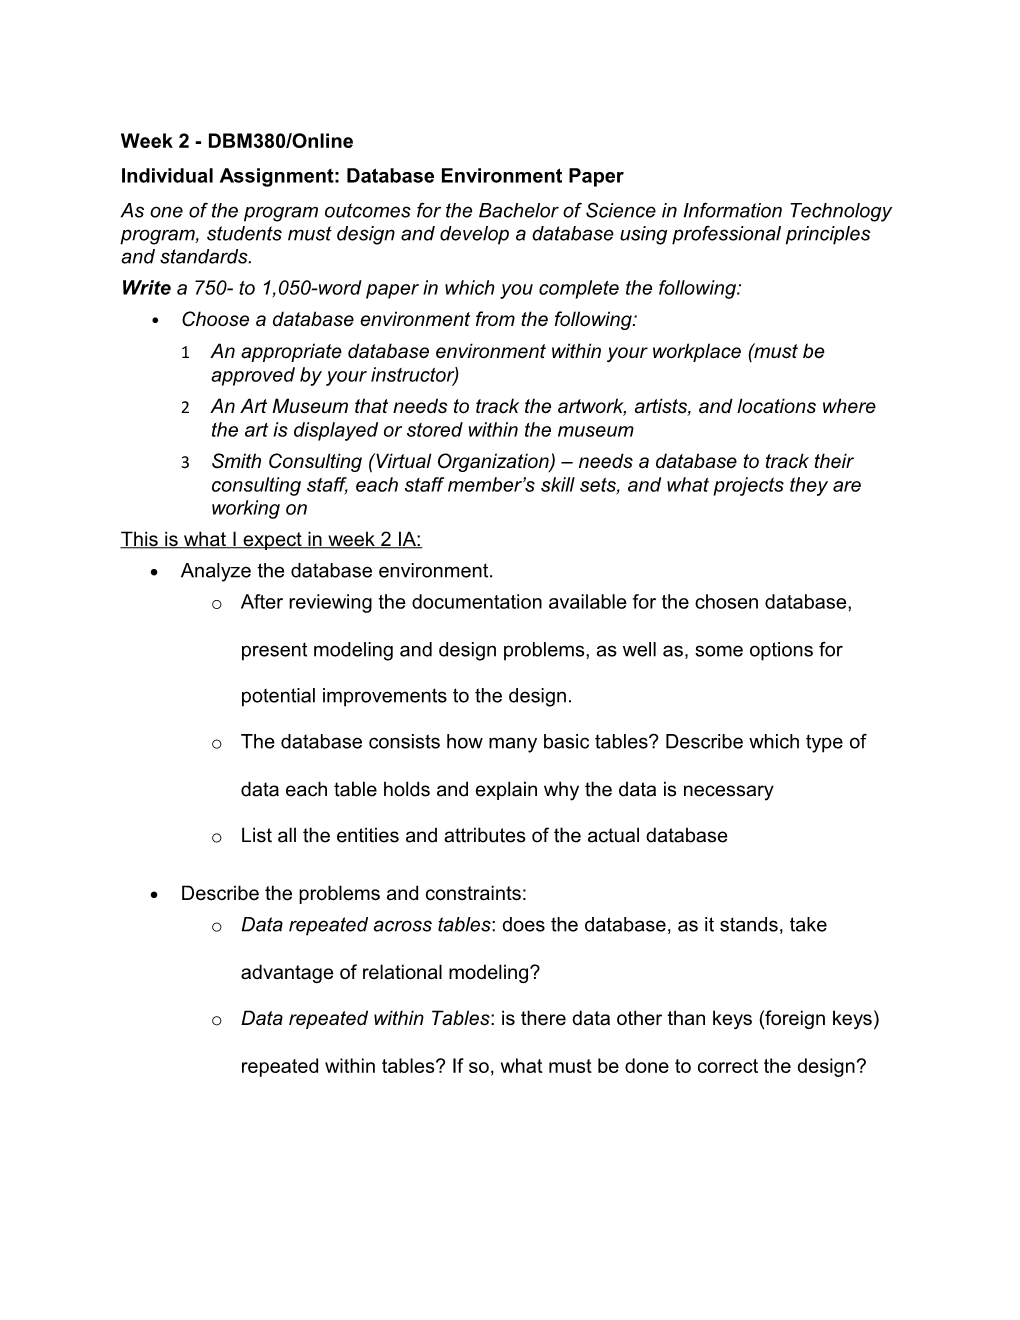 Individual Assignment: Database Environment Paper